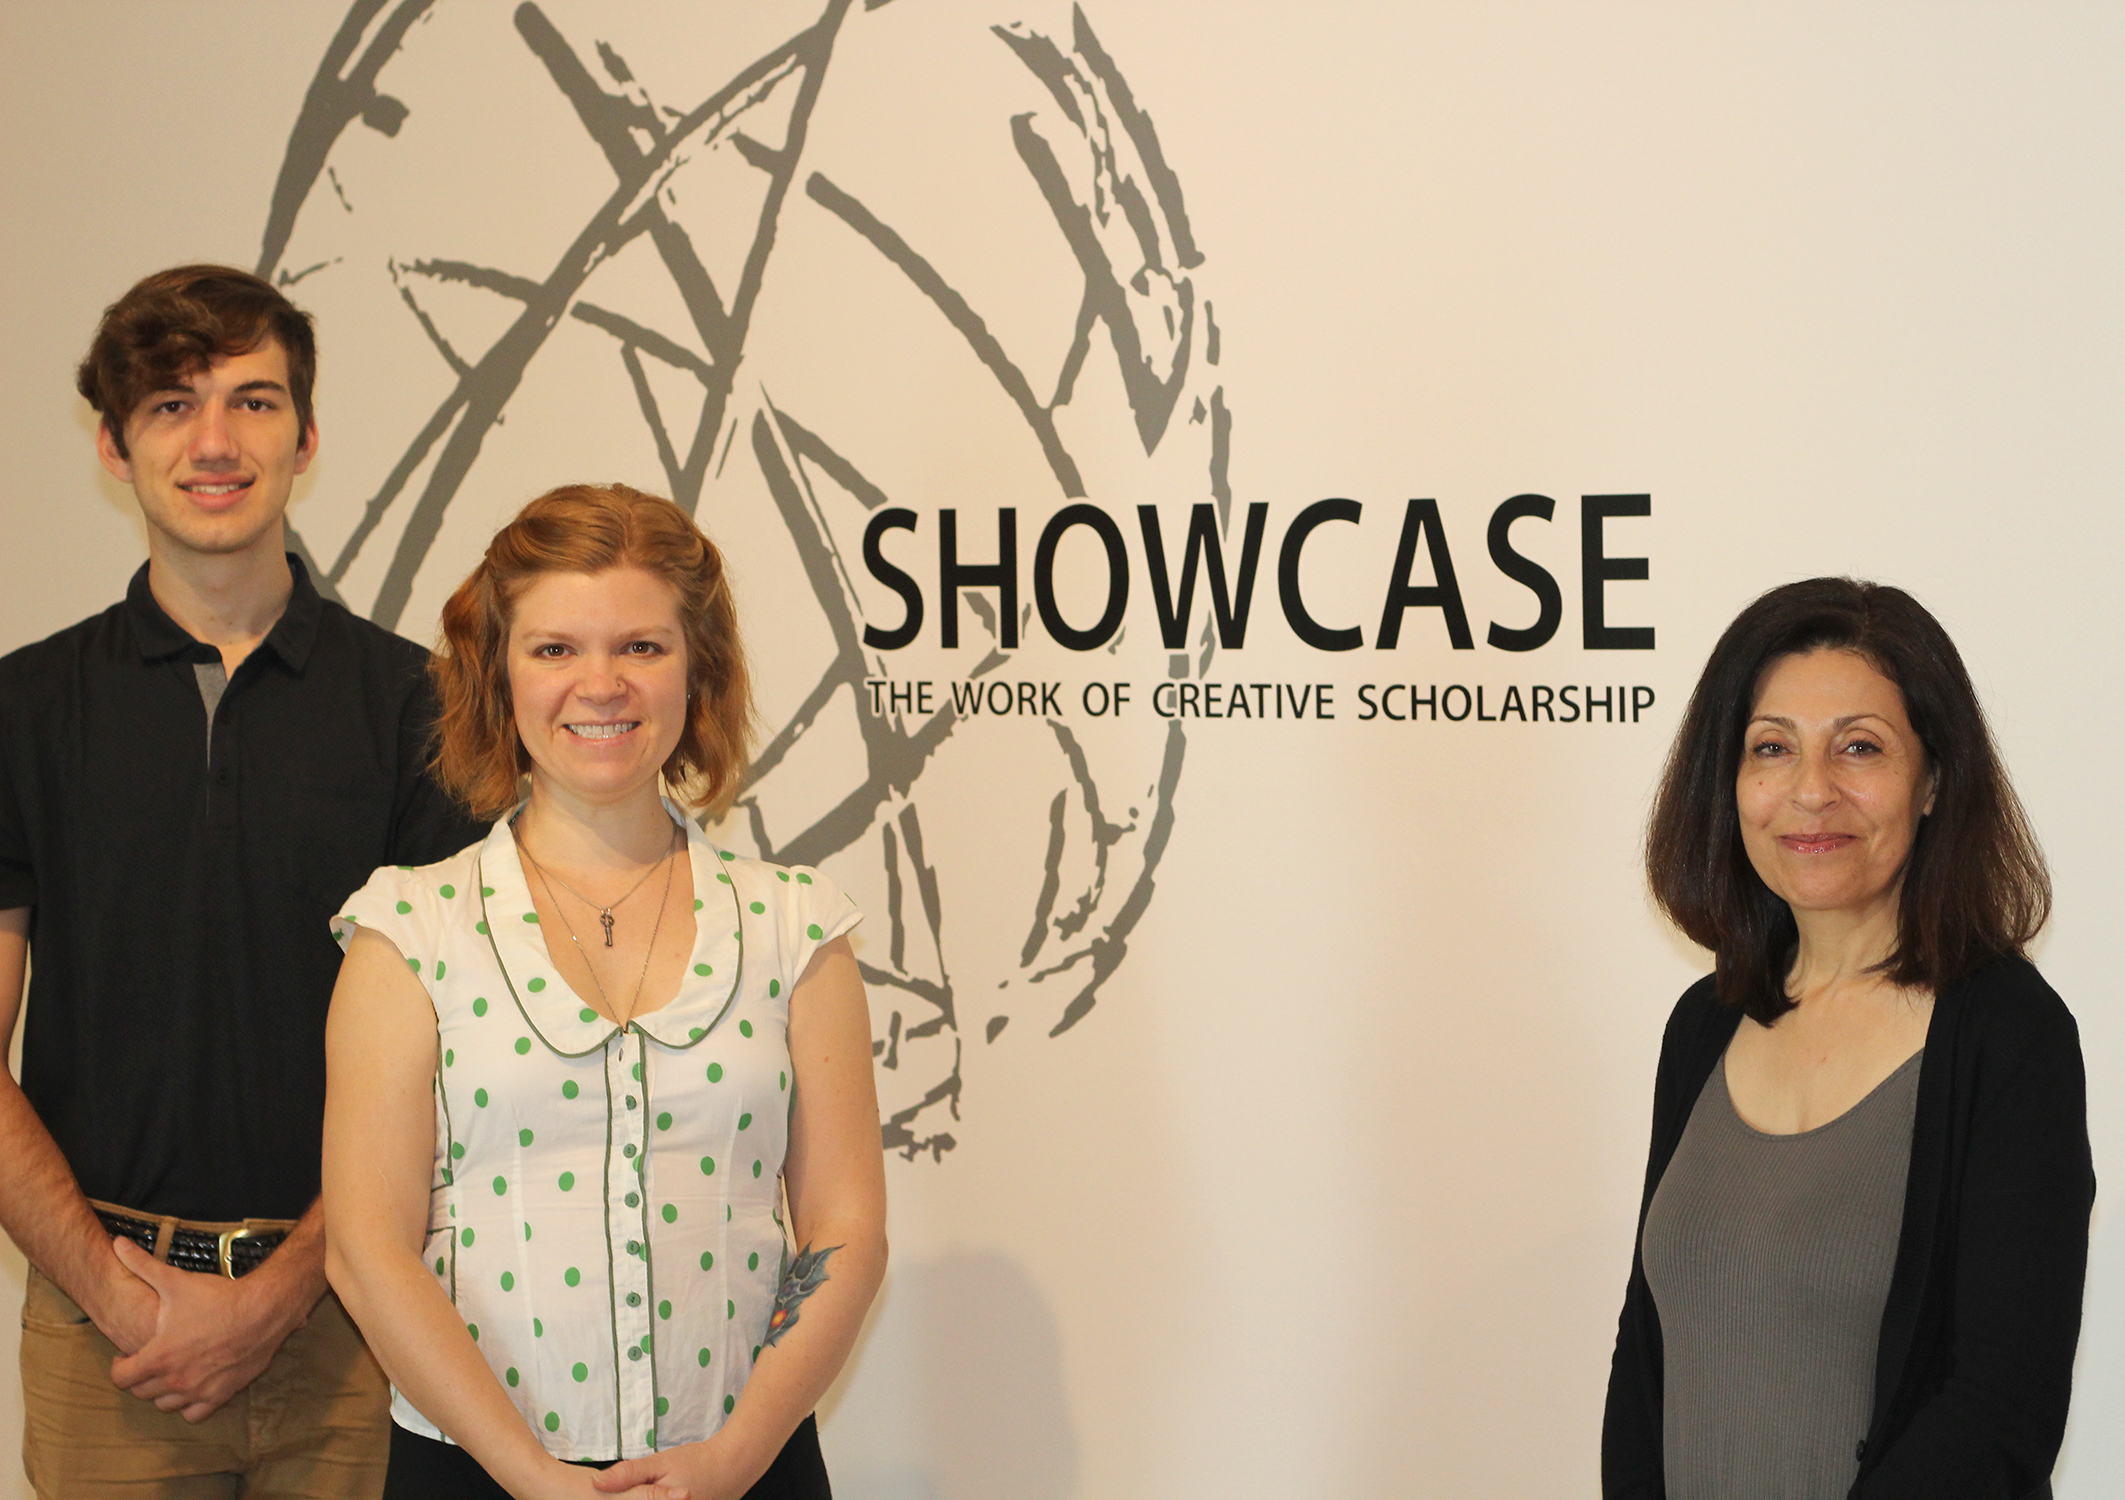 Artists featured in SHOWCASE event: Jack Stoffel, theatre student; Annie Campbell, art professor; and Fereshteh Rostampour, event organizer and professor of lighting and set design.